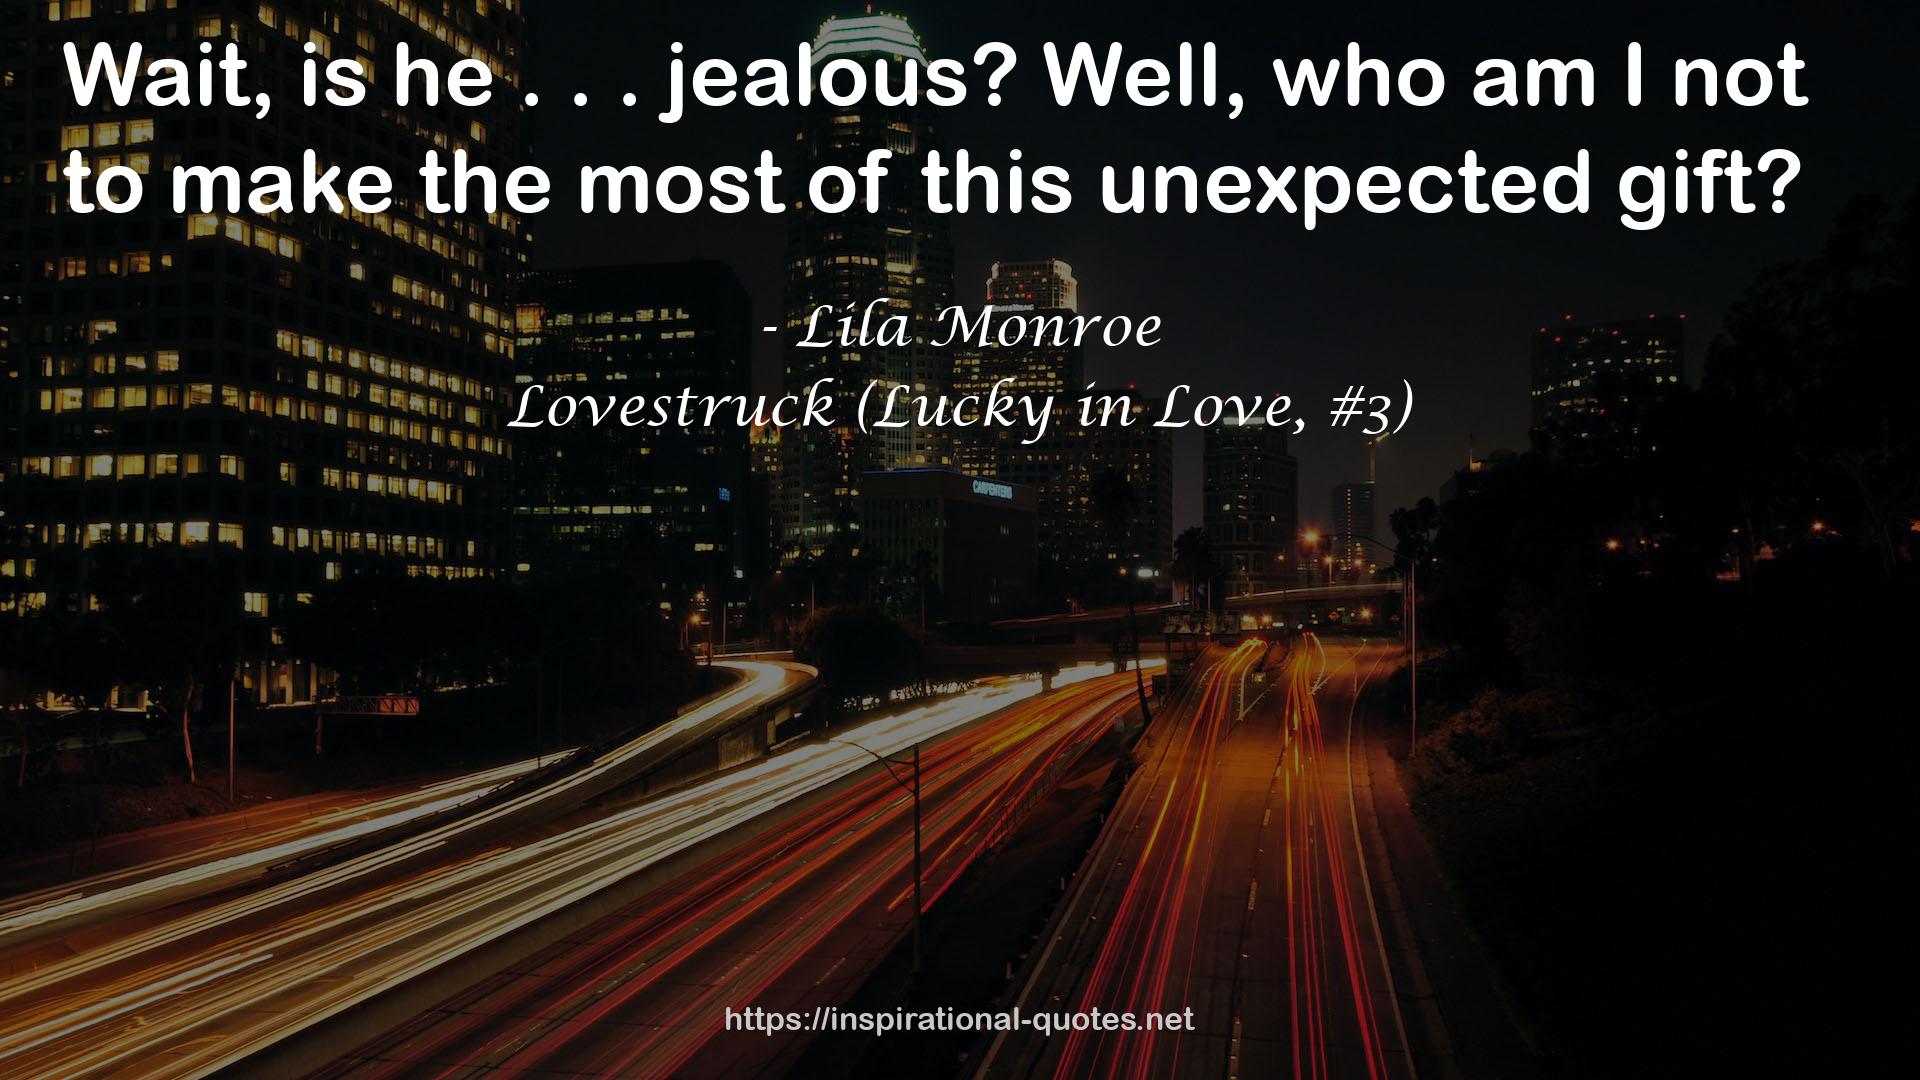 Lovestruck (Lucky in Love, #3) QUOTES